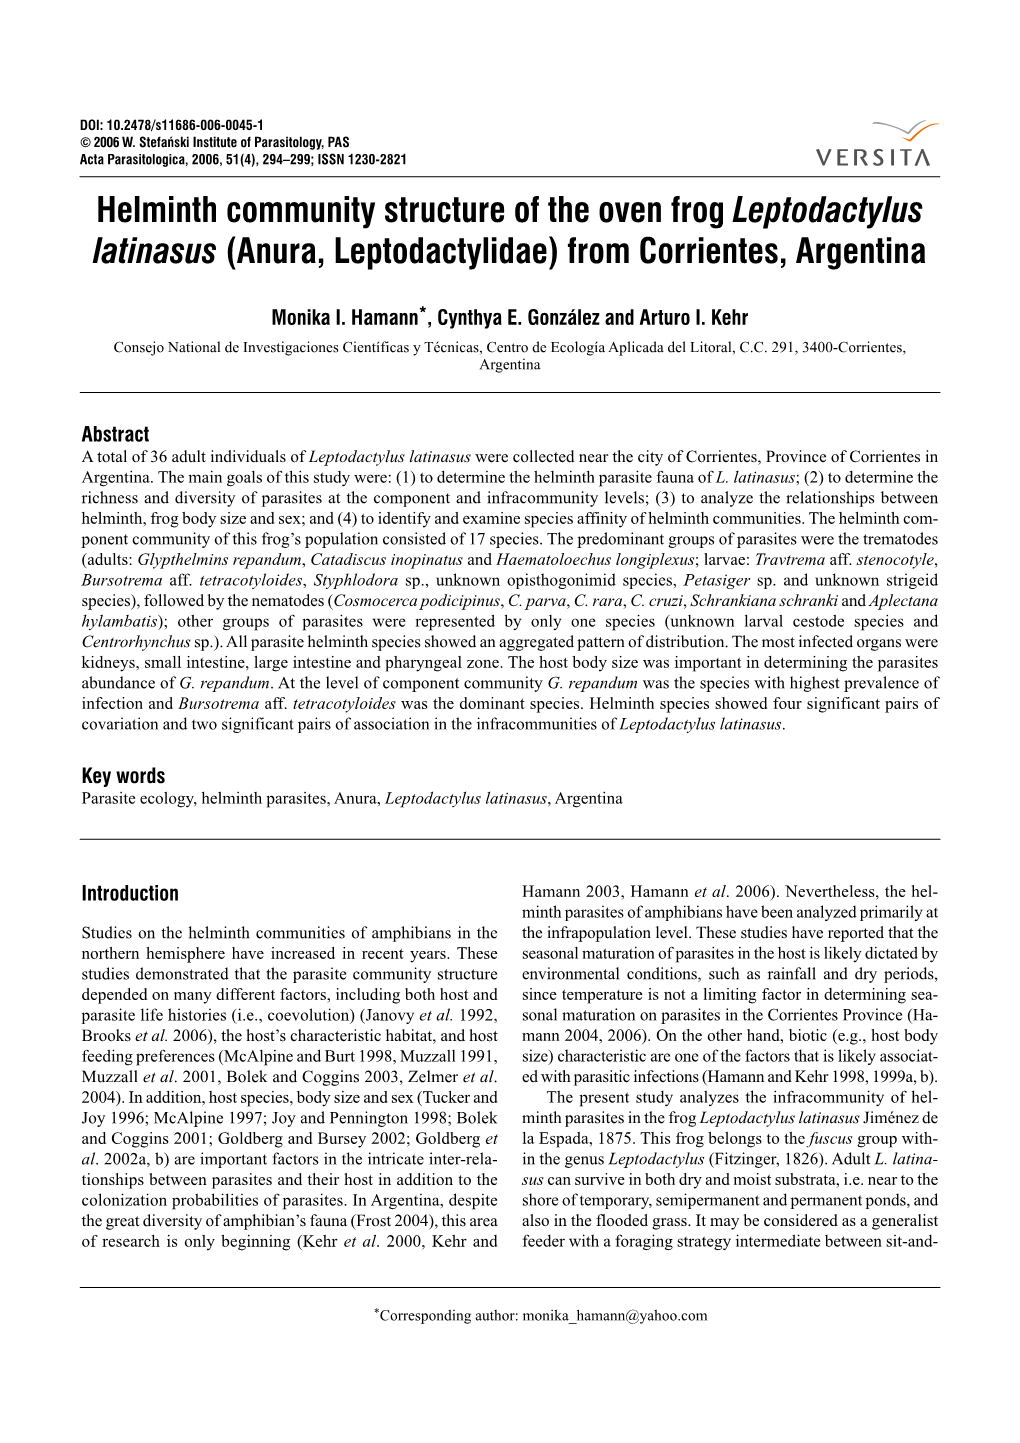 Helminth Community Structure of the Oven Frog Leptodactylus Latinasus (Anura, Leptodactylidae) from Corrientes, Argentina Stefañski